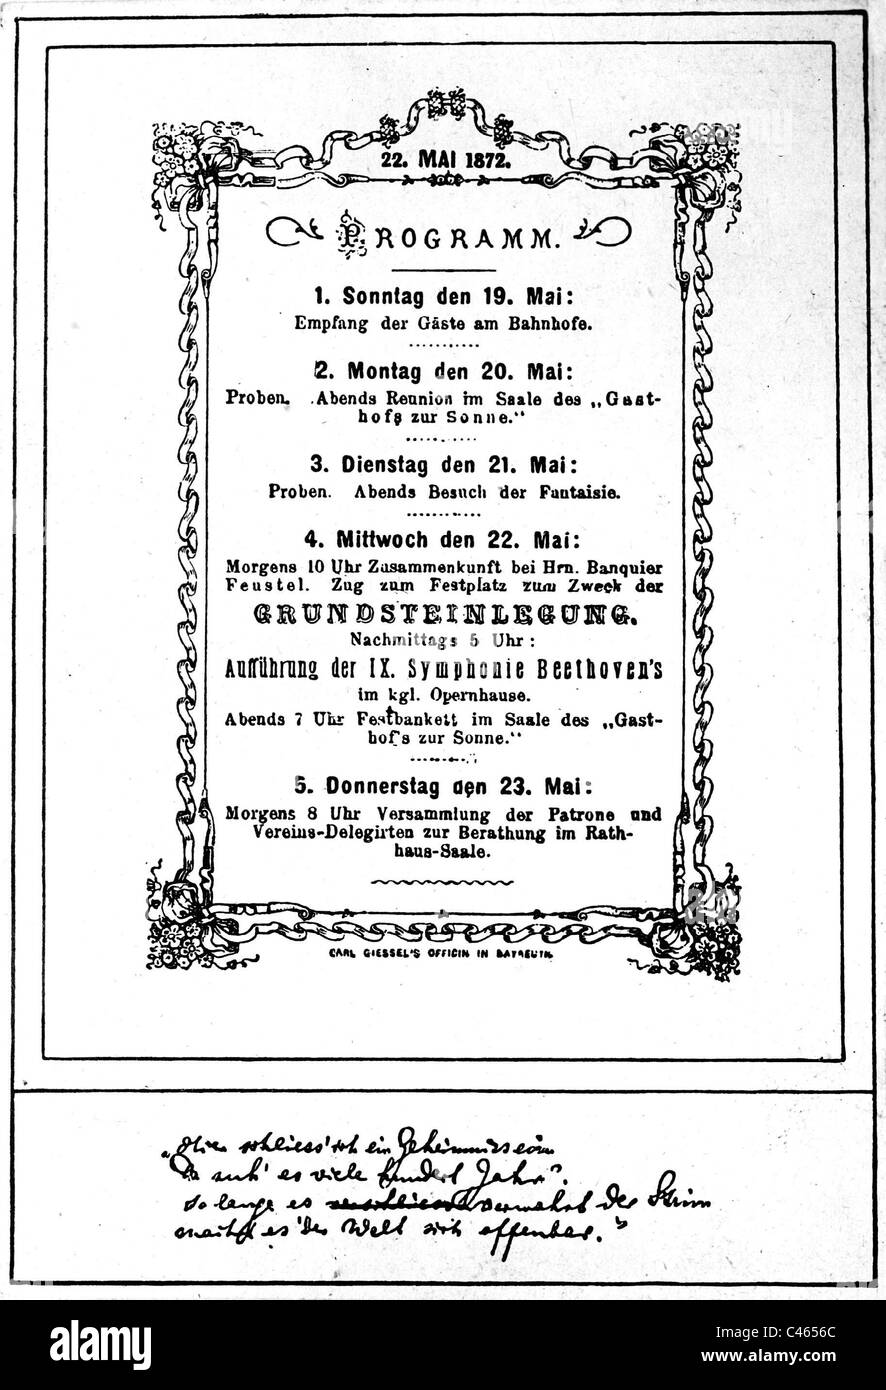 Programme for the groundbreaking ceremony of the Bayreuth Festspielhaus, 1872 Stock Photo